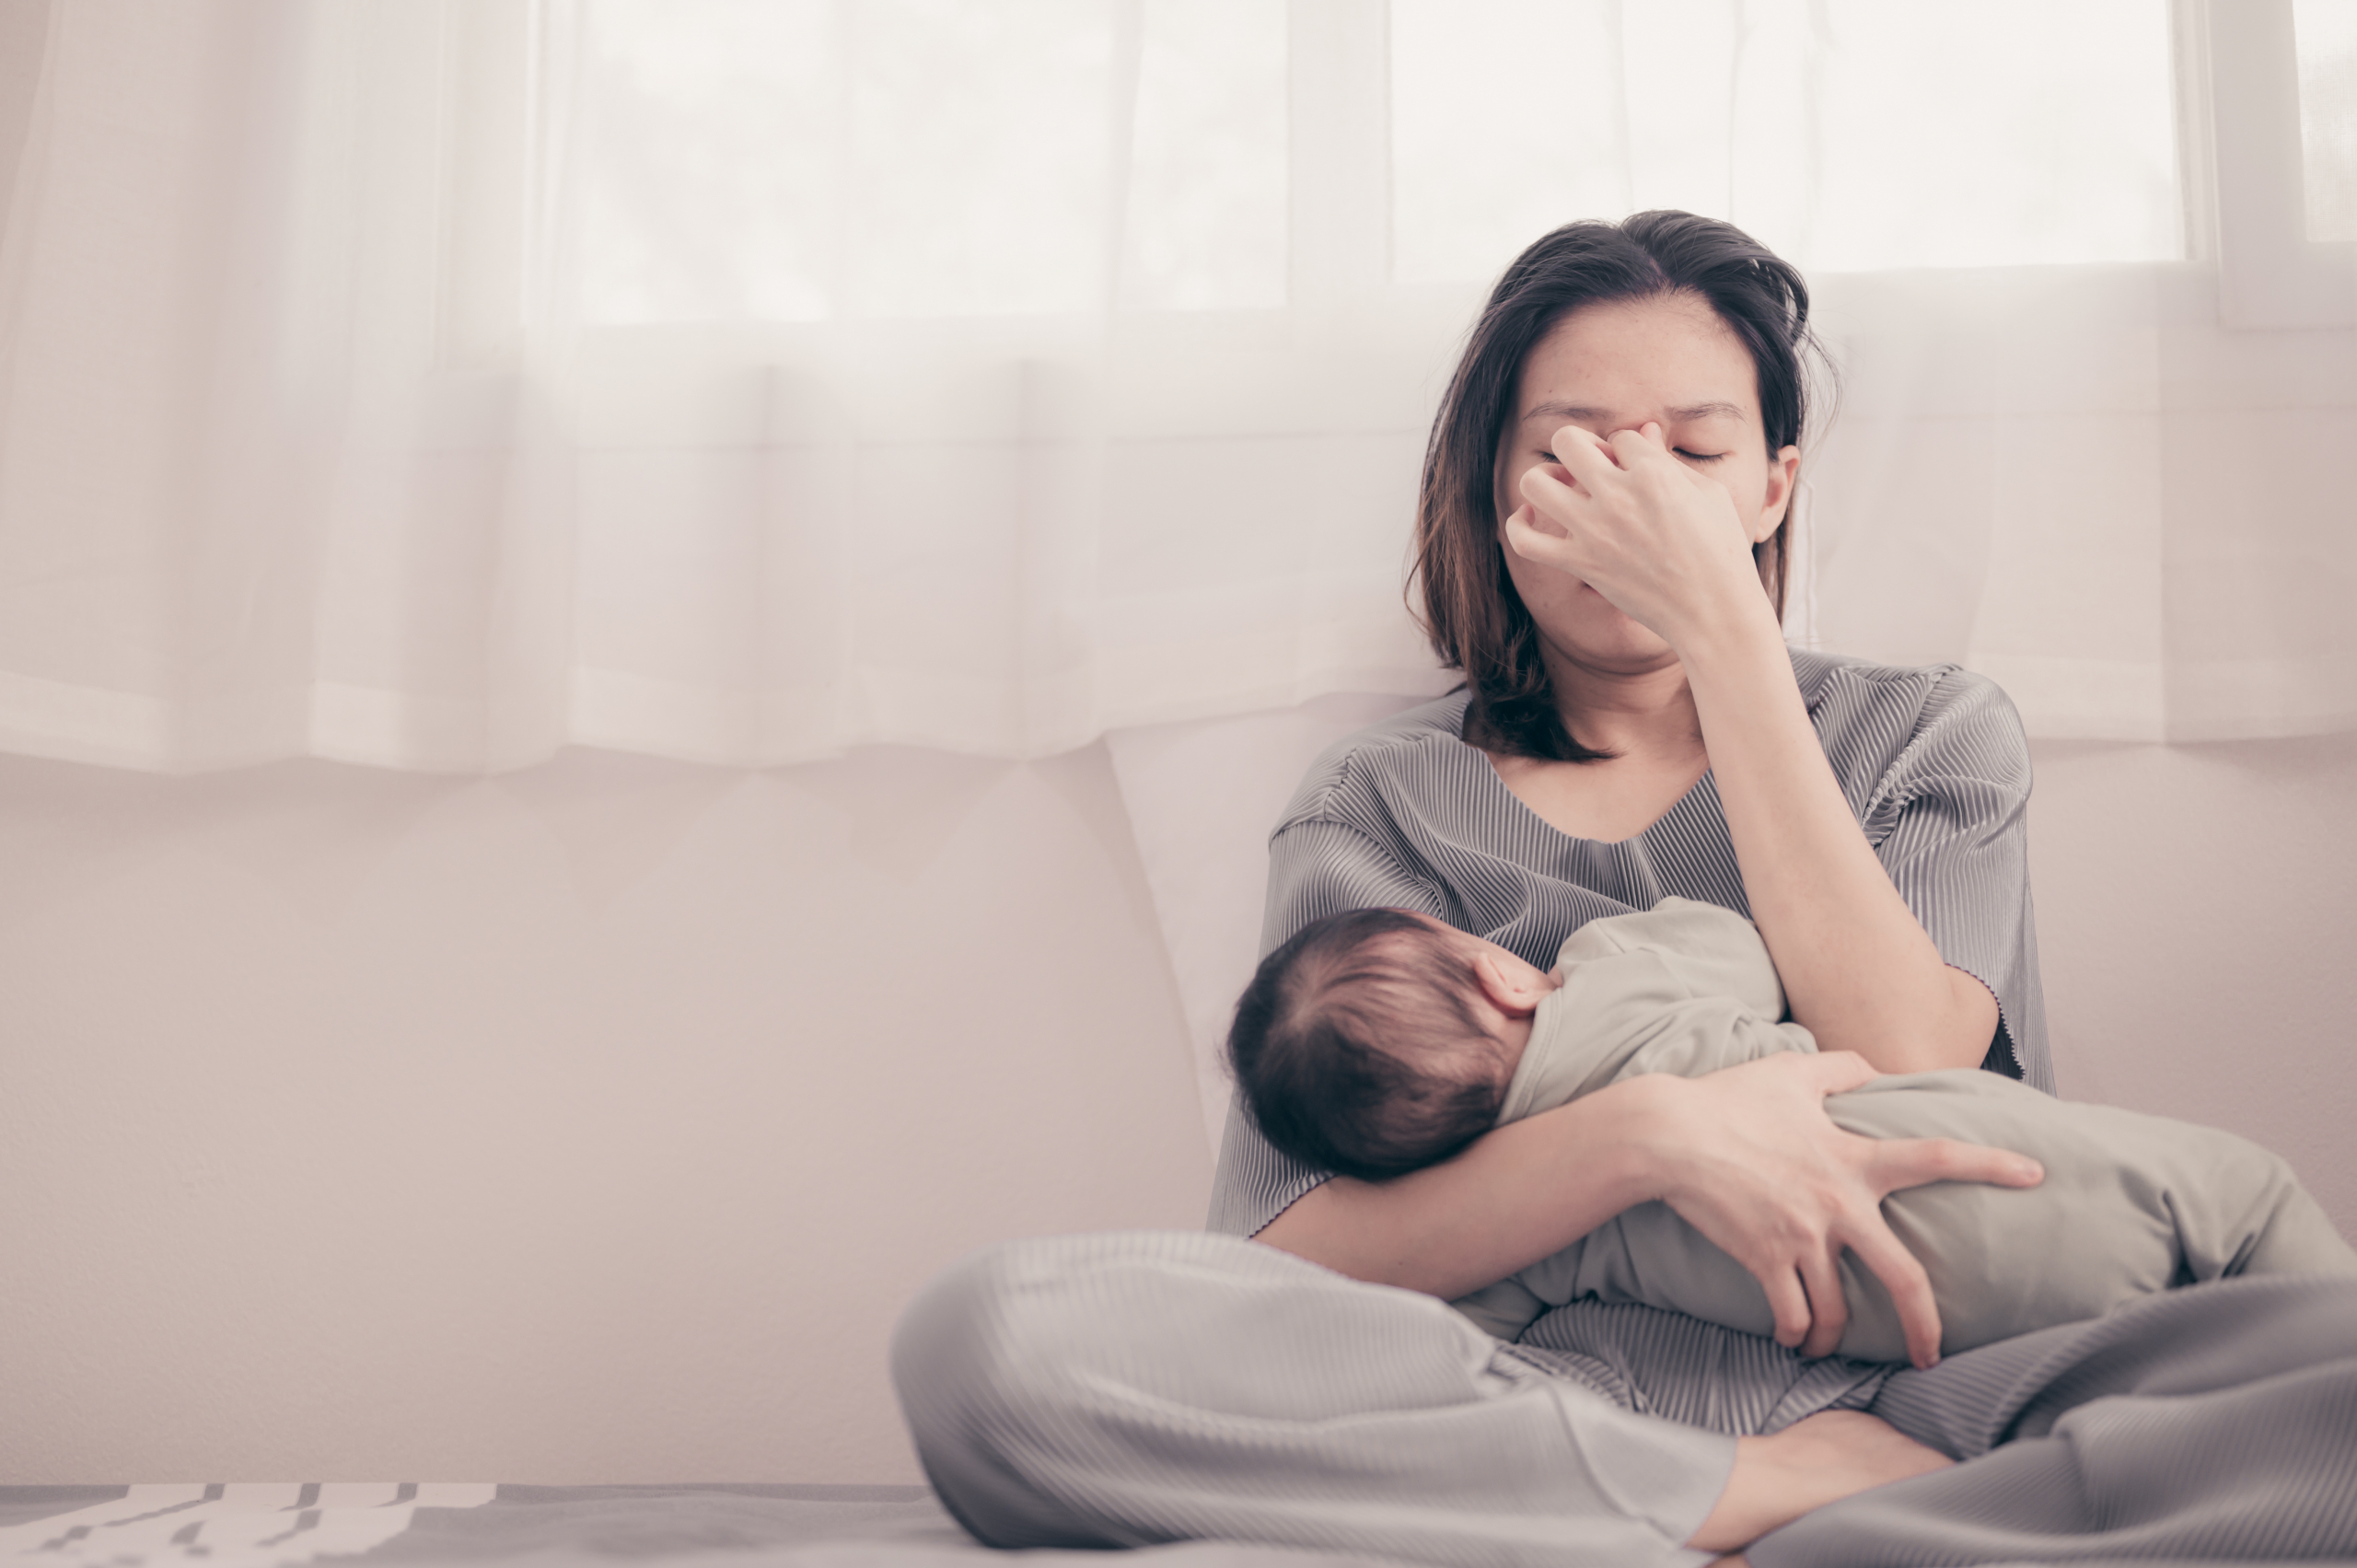 Childbirth-Related PTSD and Postpartum Depression Commonly Occur Together